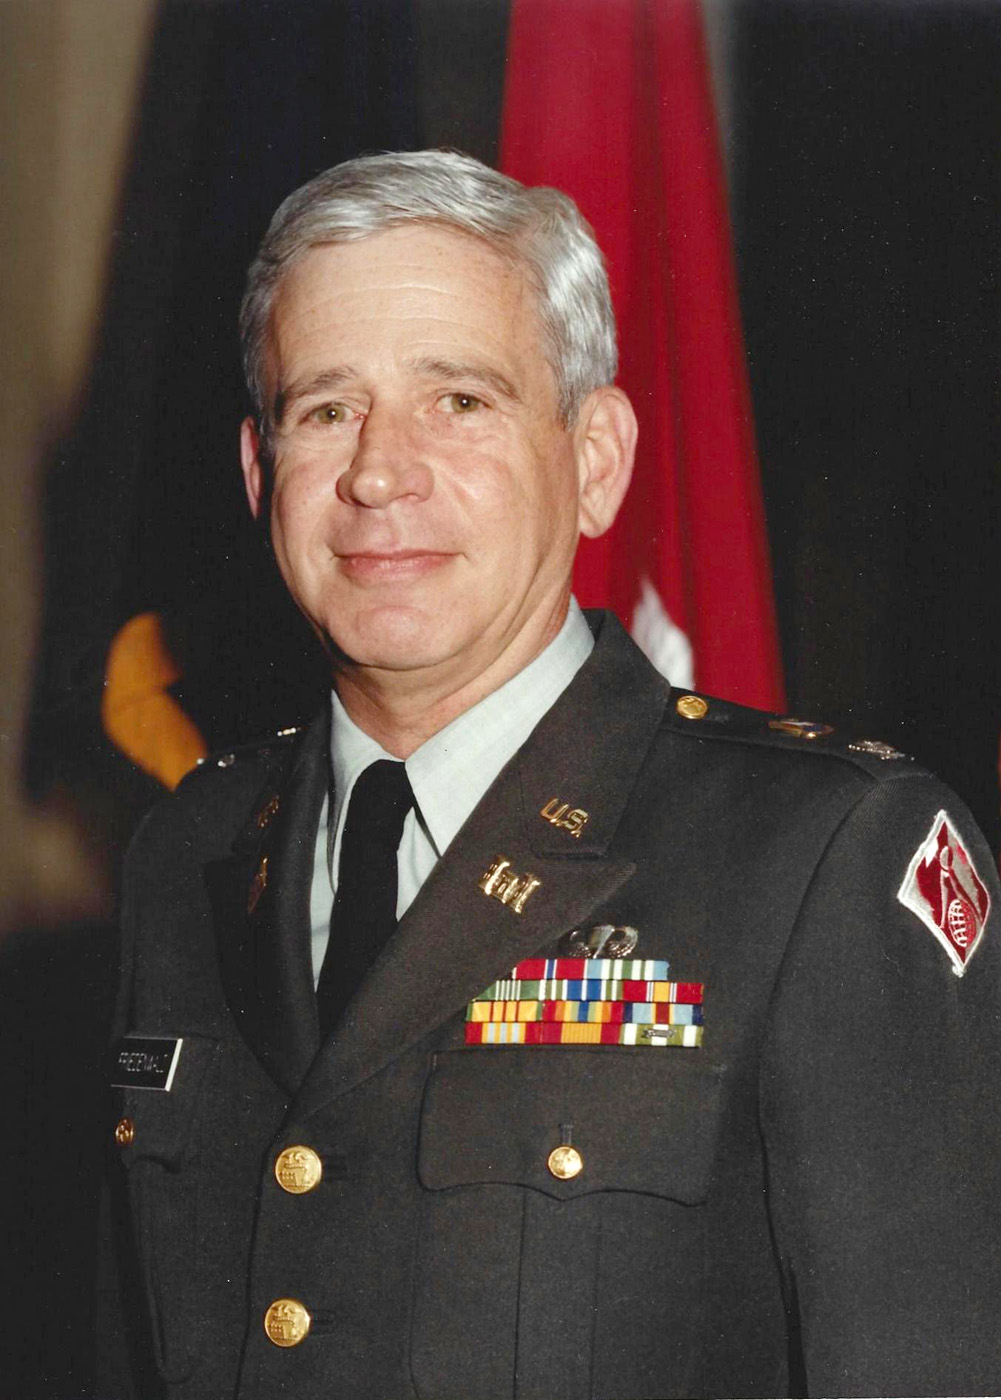 Retired Army Col. Bob Friedenwald died of lung cancer July 31 at age 77.